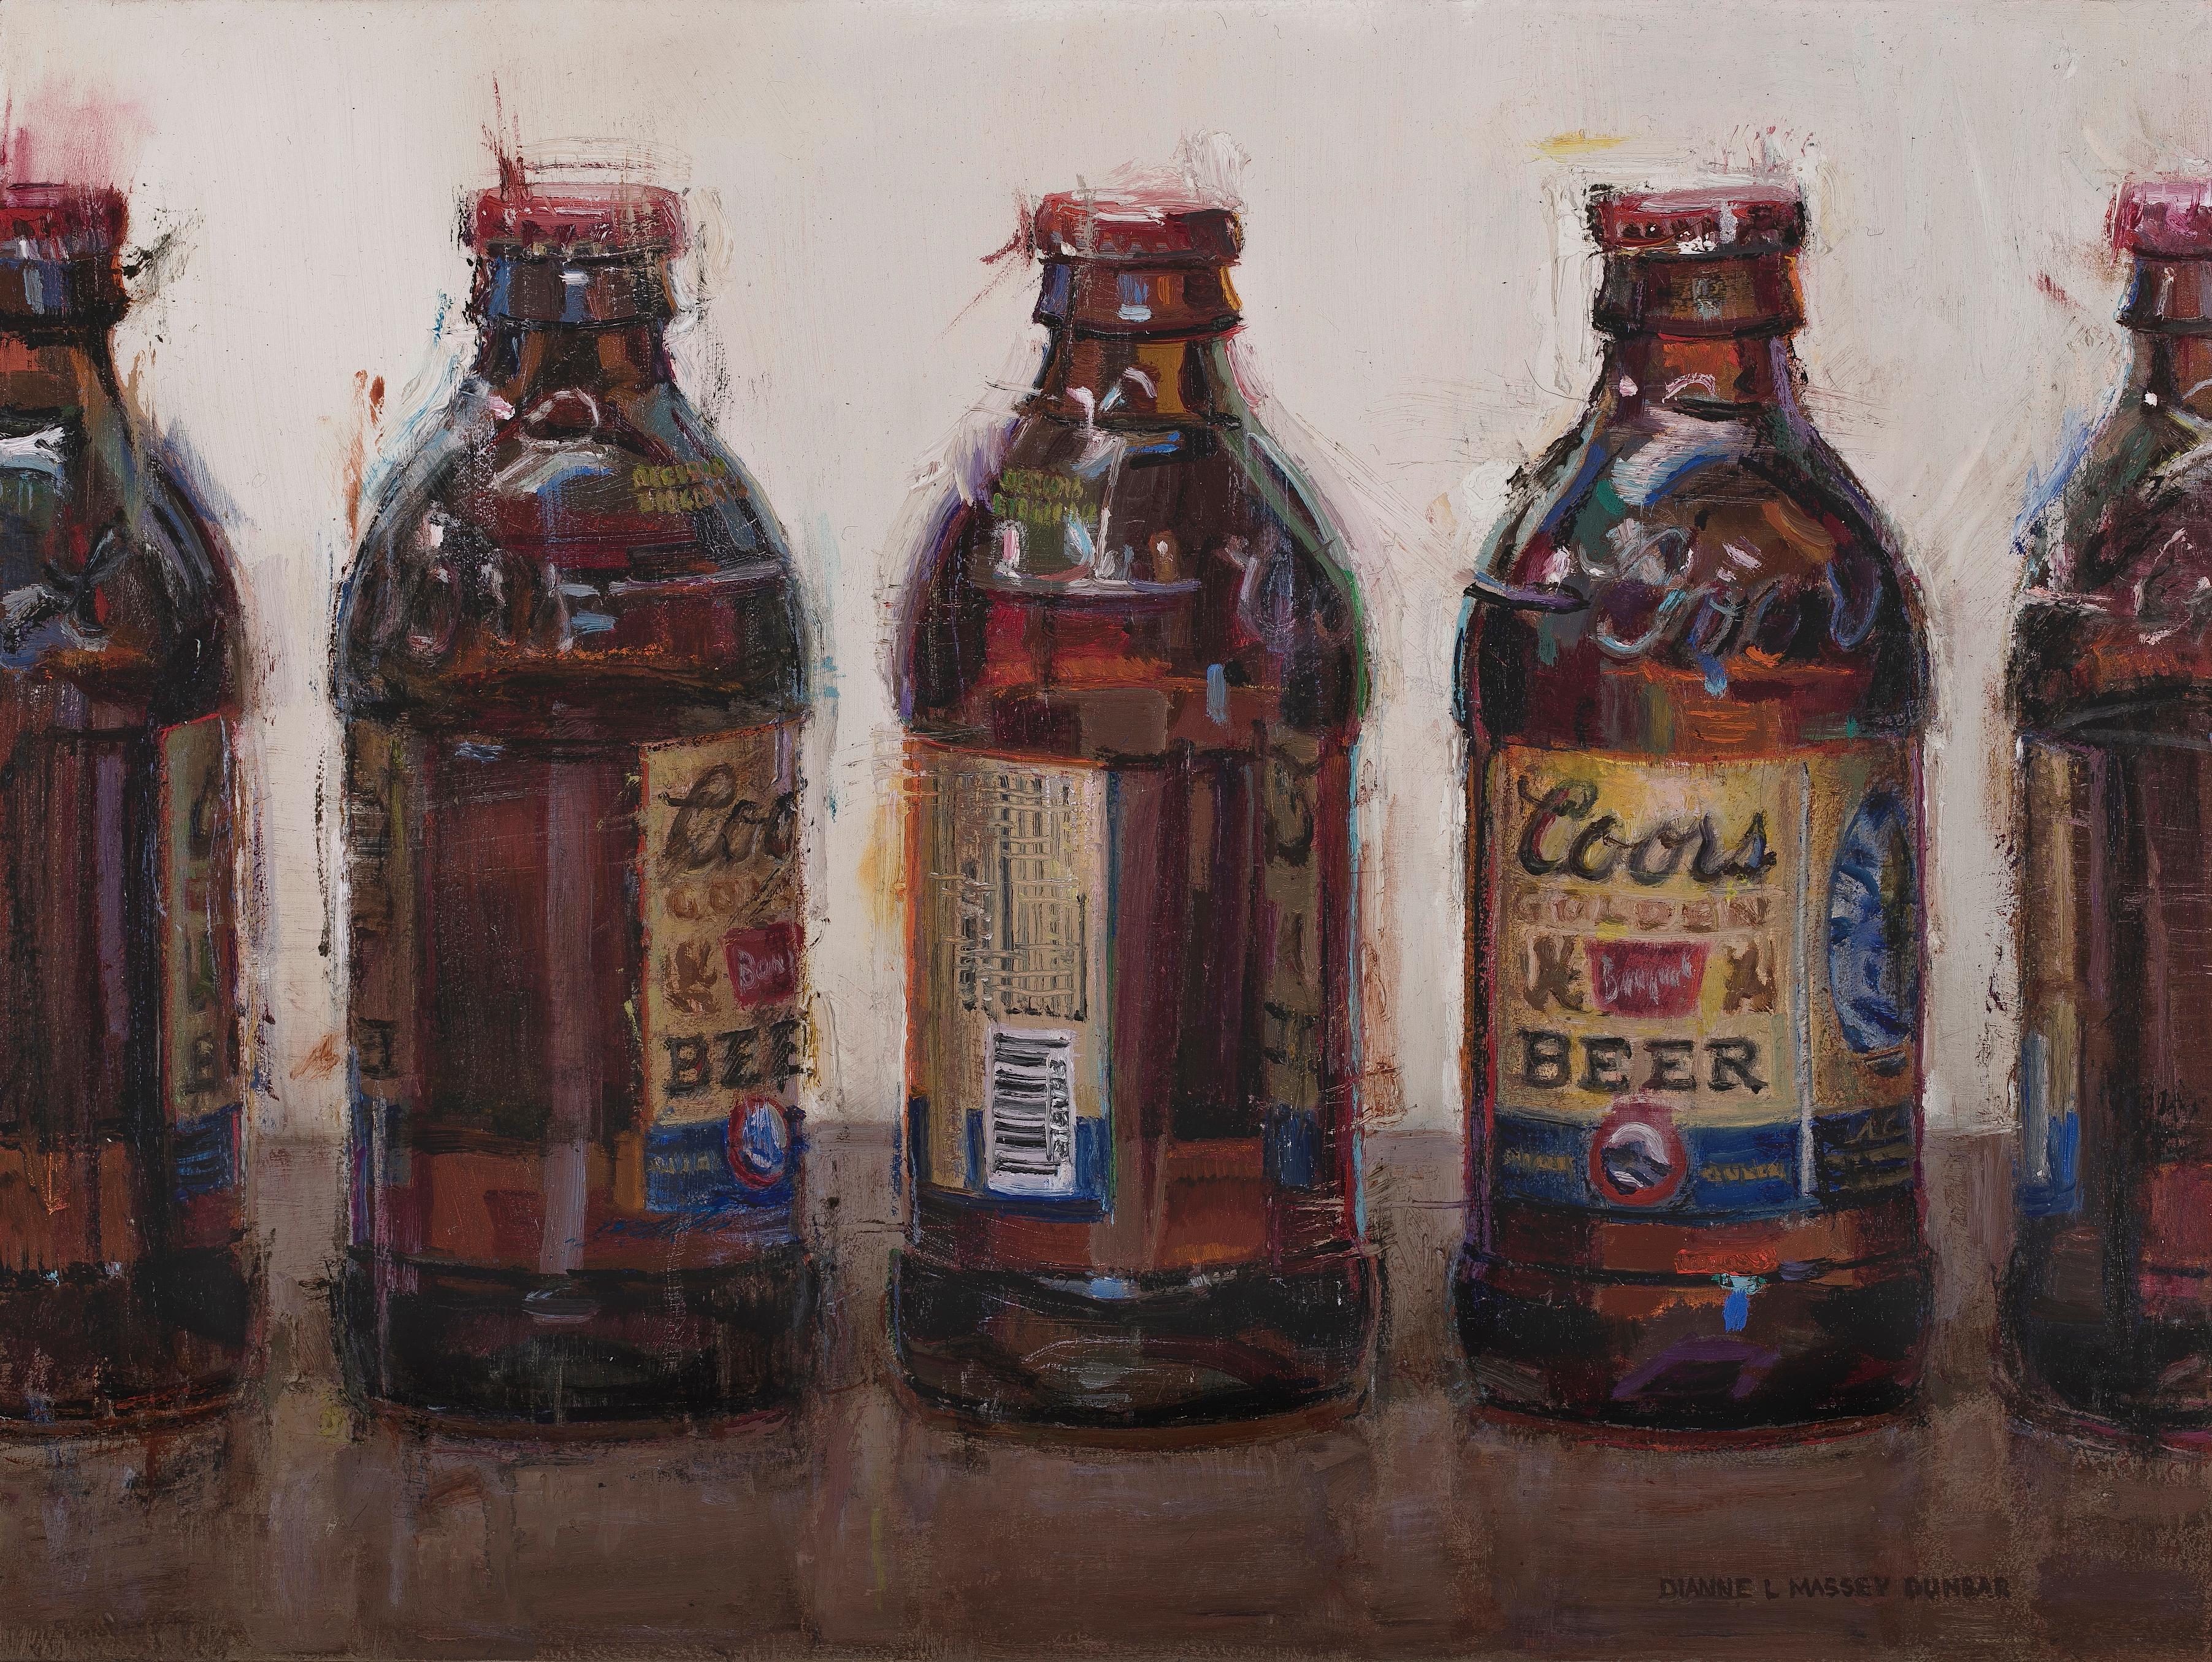 "Coors Banquet Bottles", Oil Painting